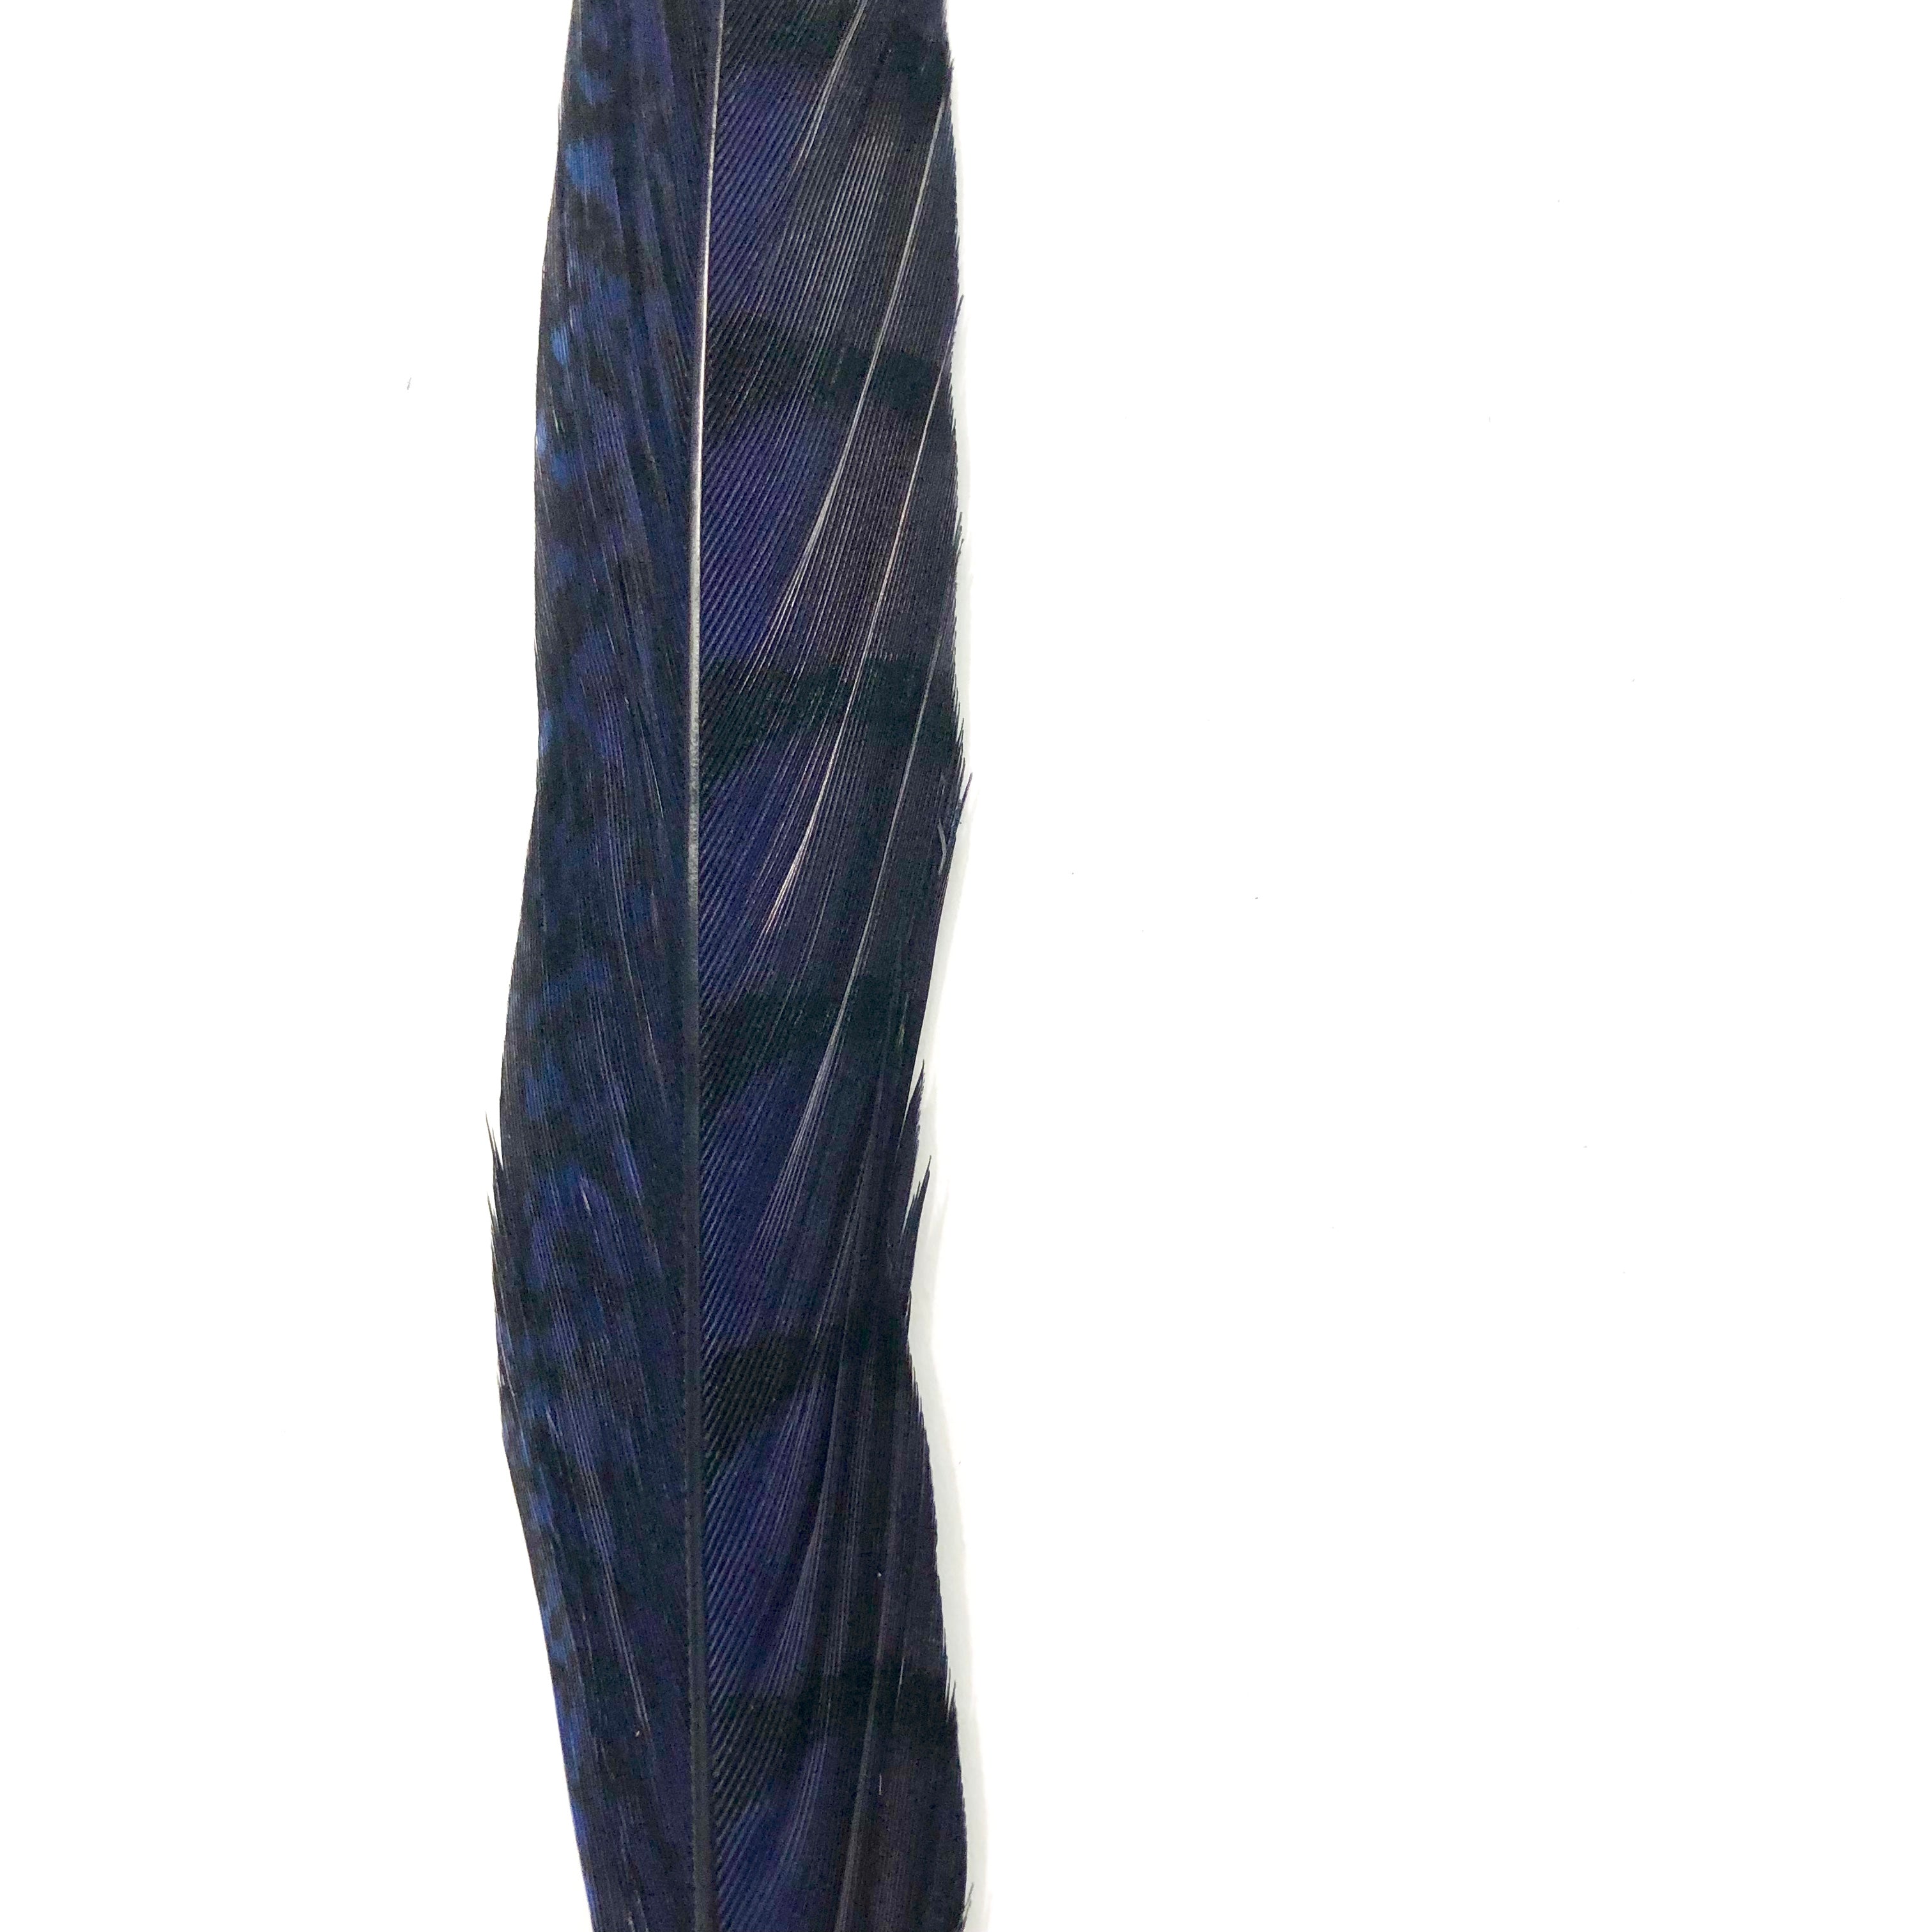 10" to 20" Lady Amherst Pheasant Side Tail Feather - Navy